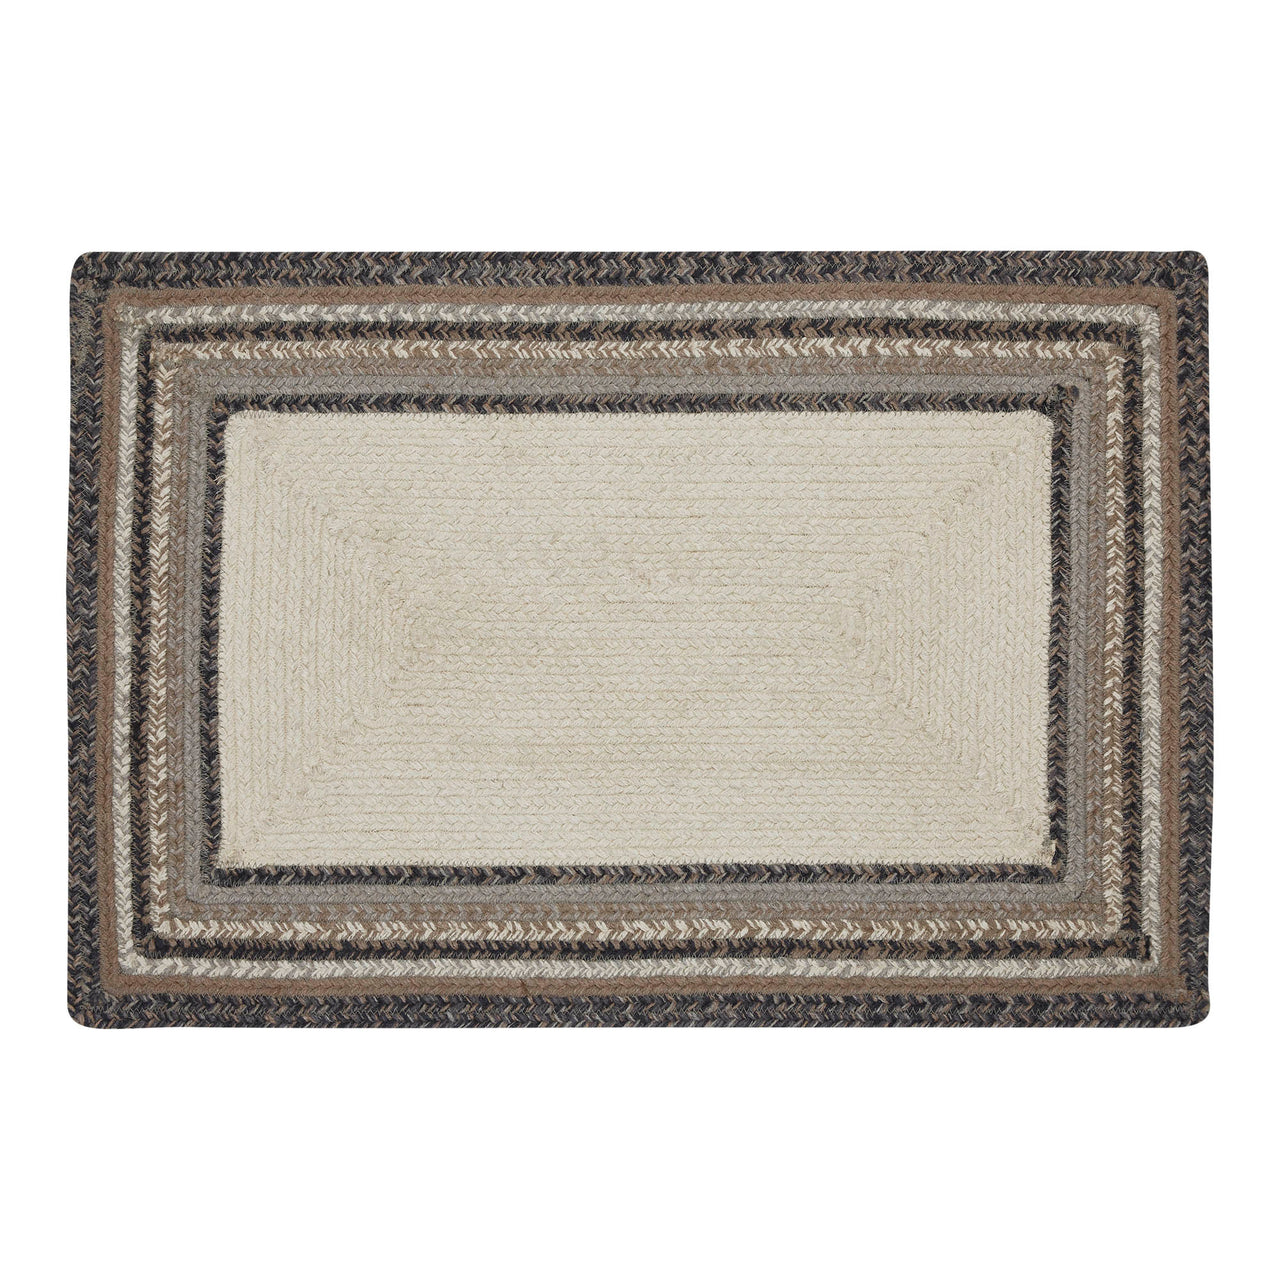 Floral Vine Jute Braided Rug Rect with Rug Pad 20"x30" VHC Brands